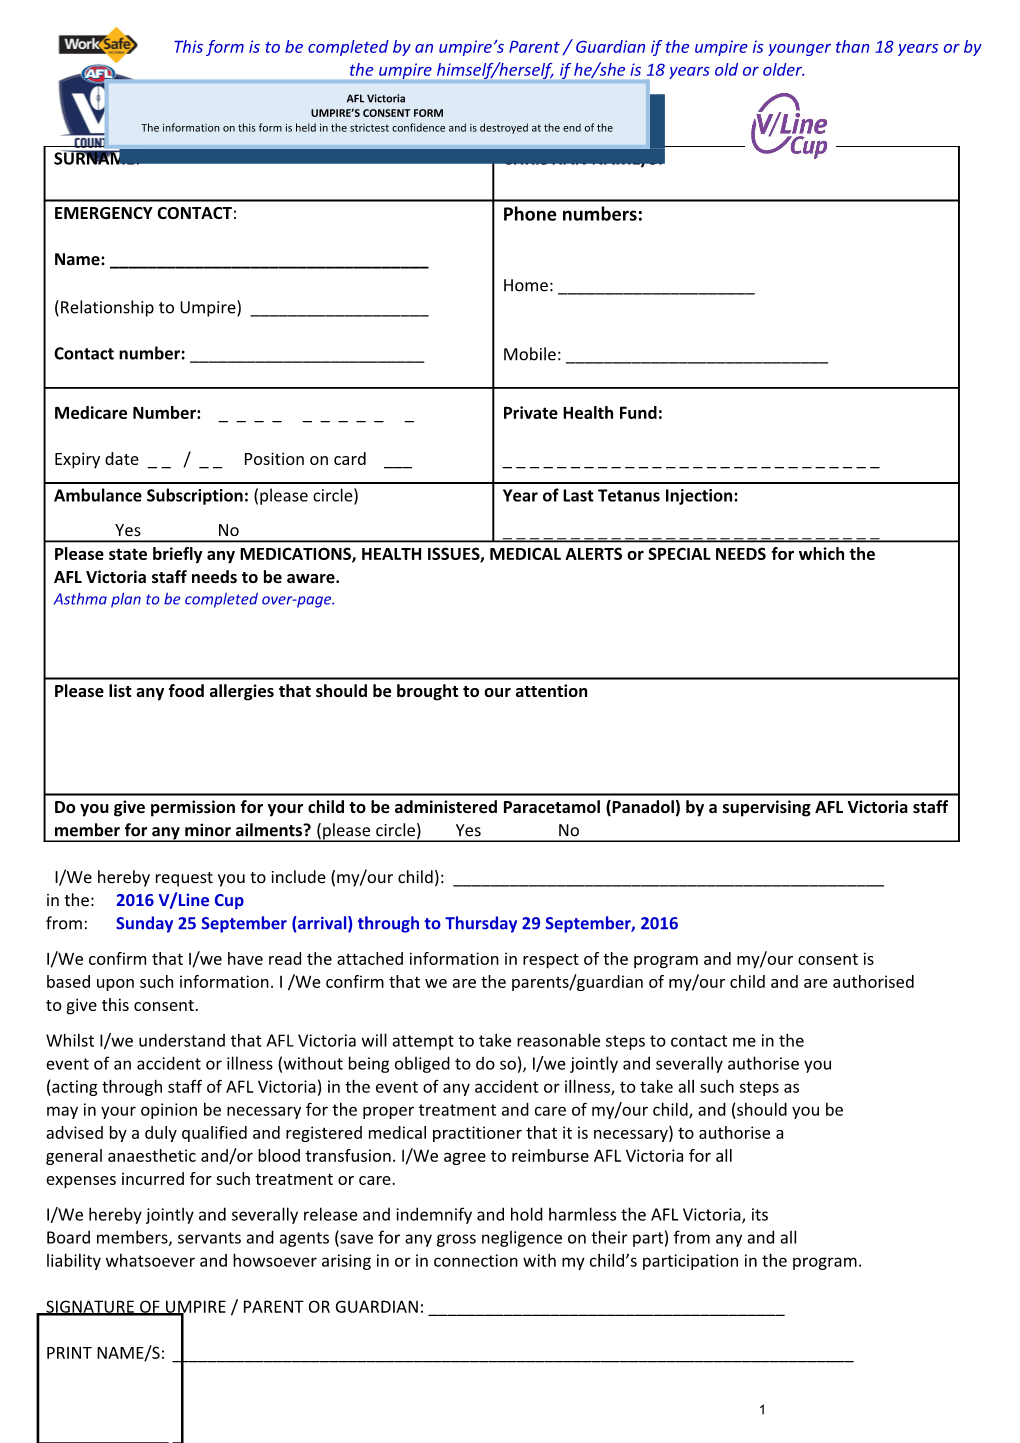 This Form Is to Be Completed by an Umpire S Parent / Guardian If the Umpire Is Younger